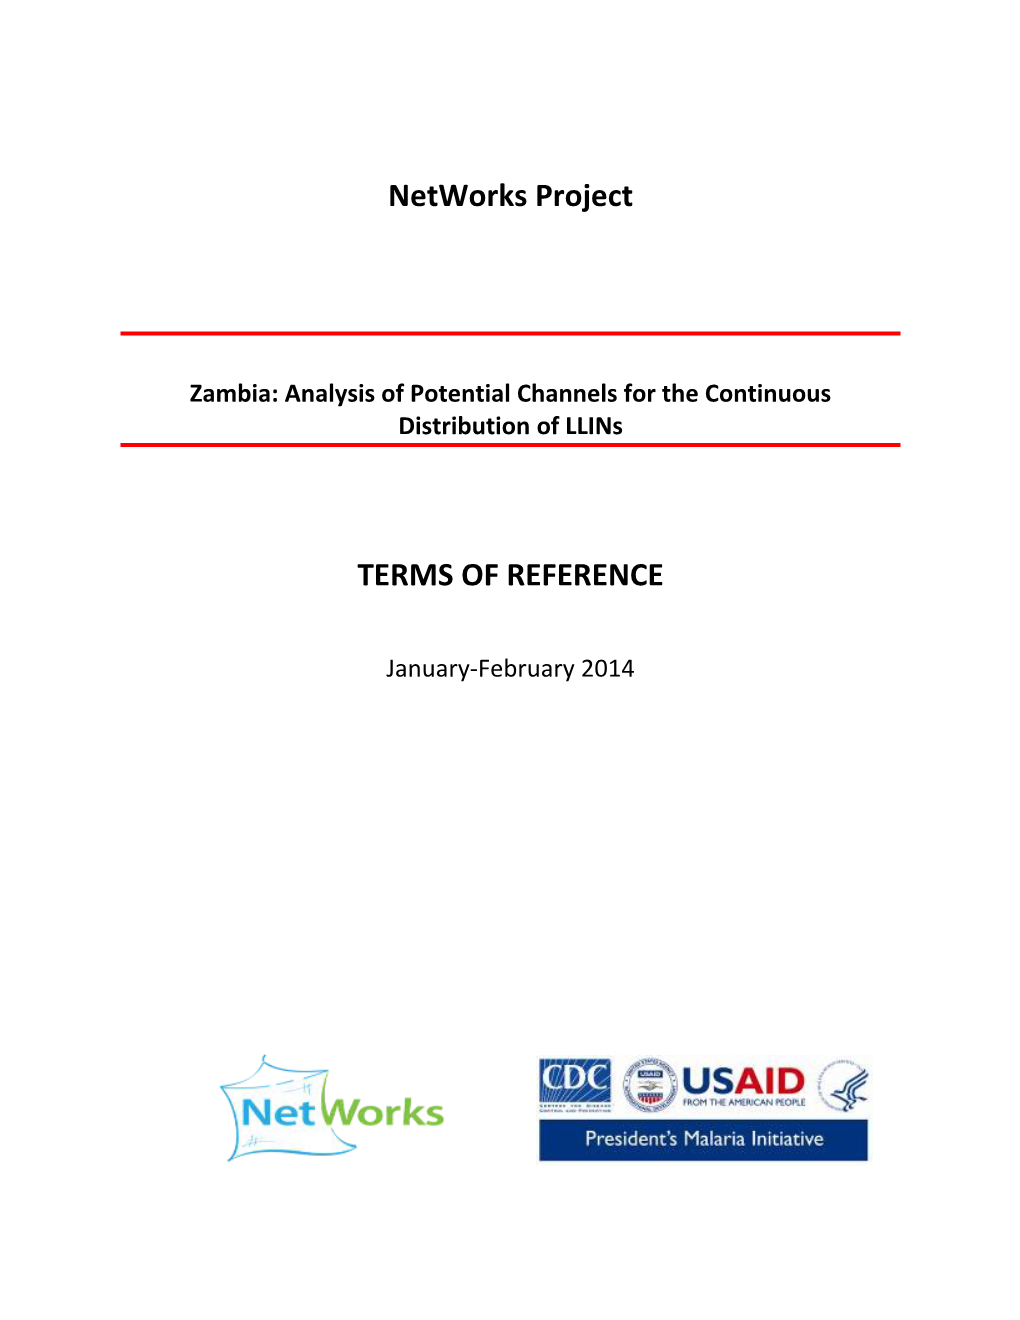 Zambia: Analysis of Potential Channels for the Continuous Distribution of Llins